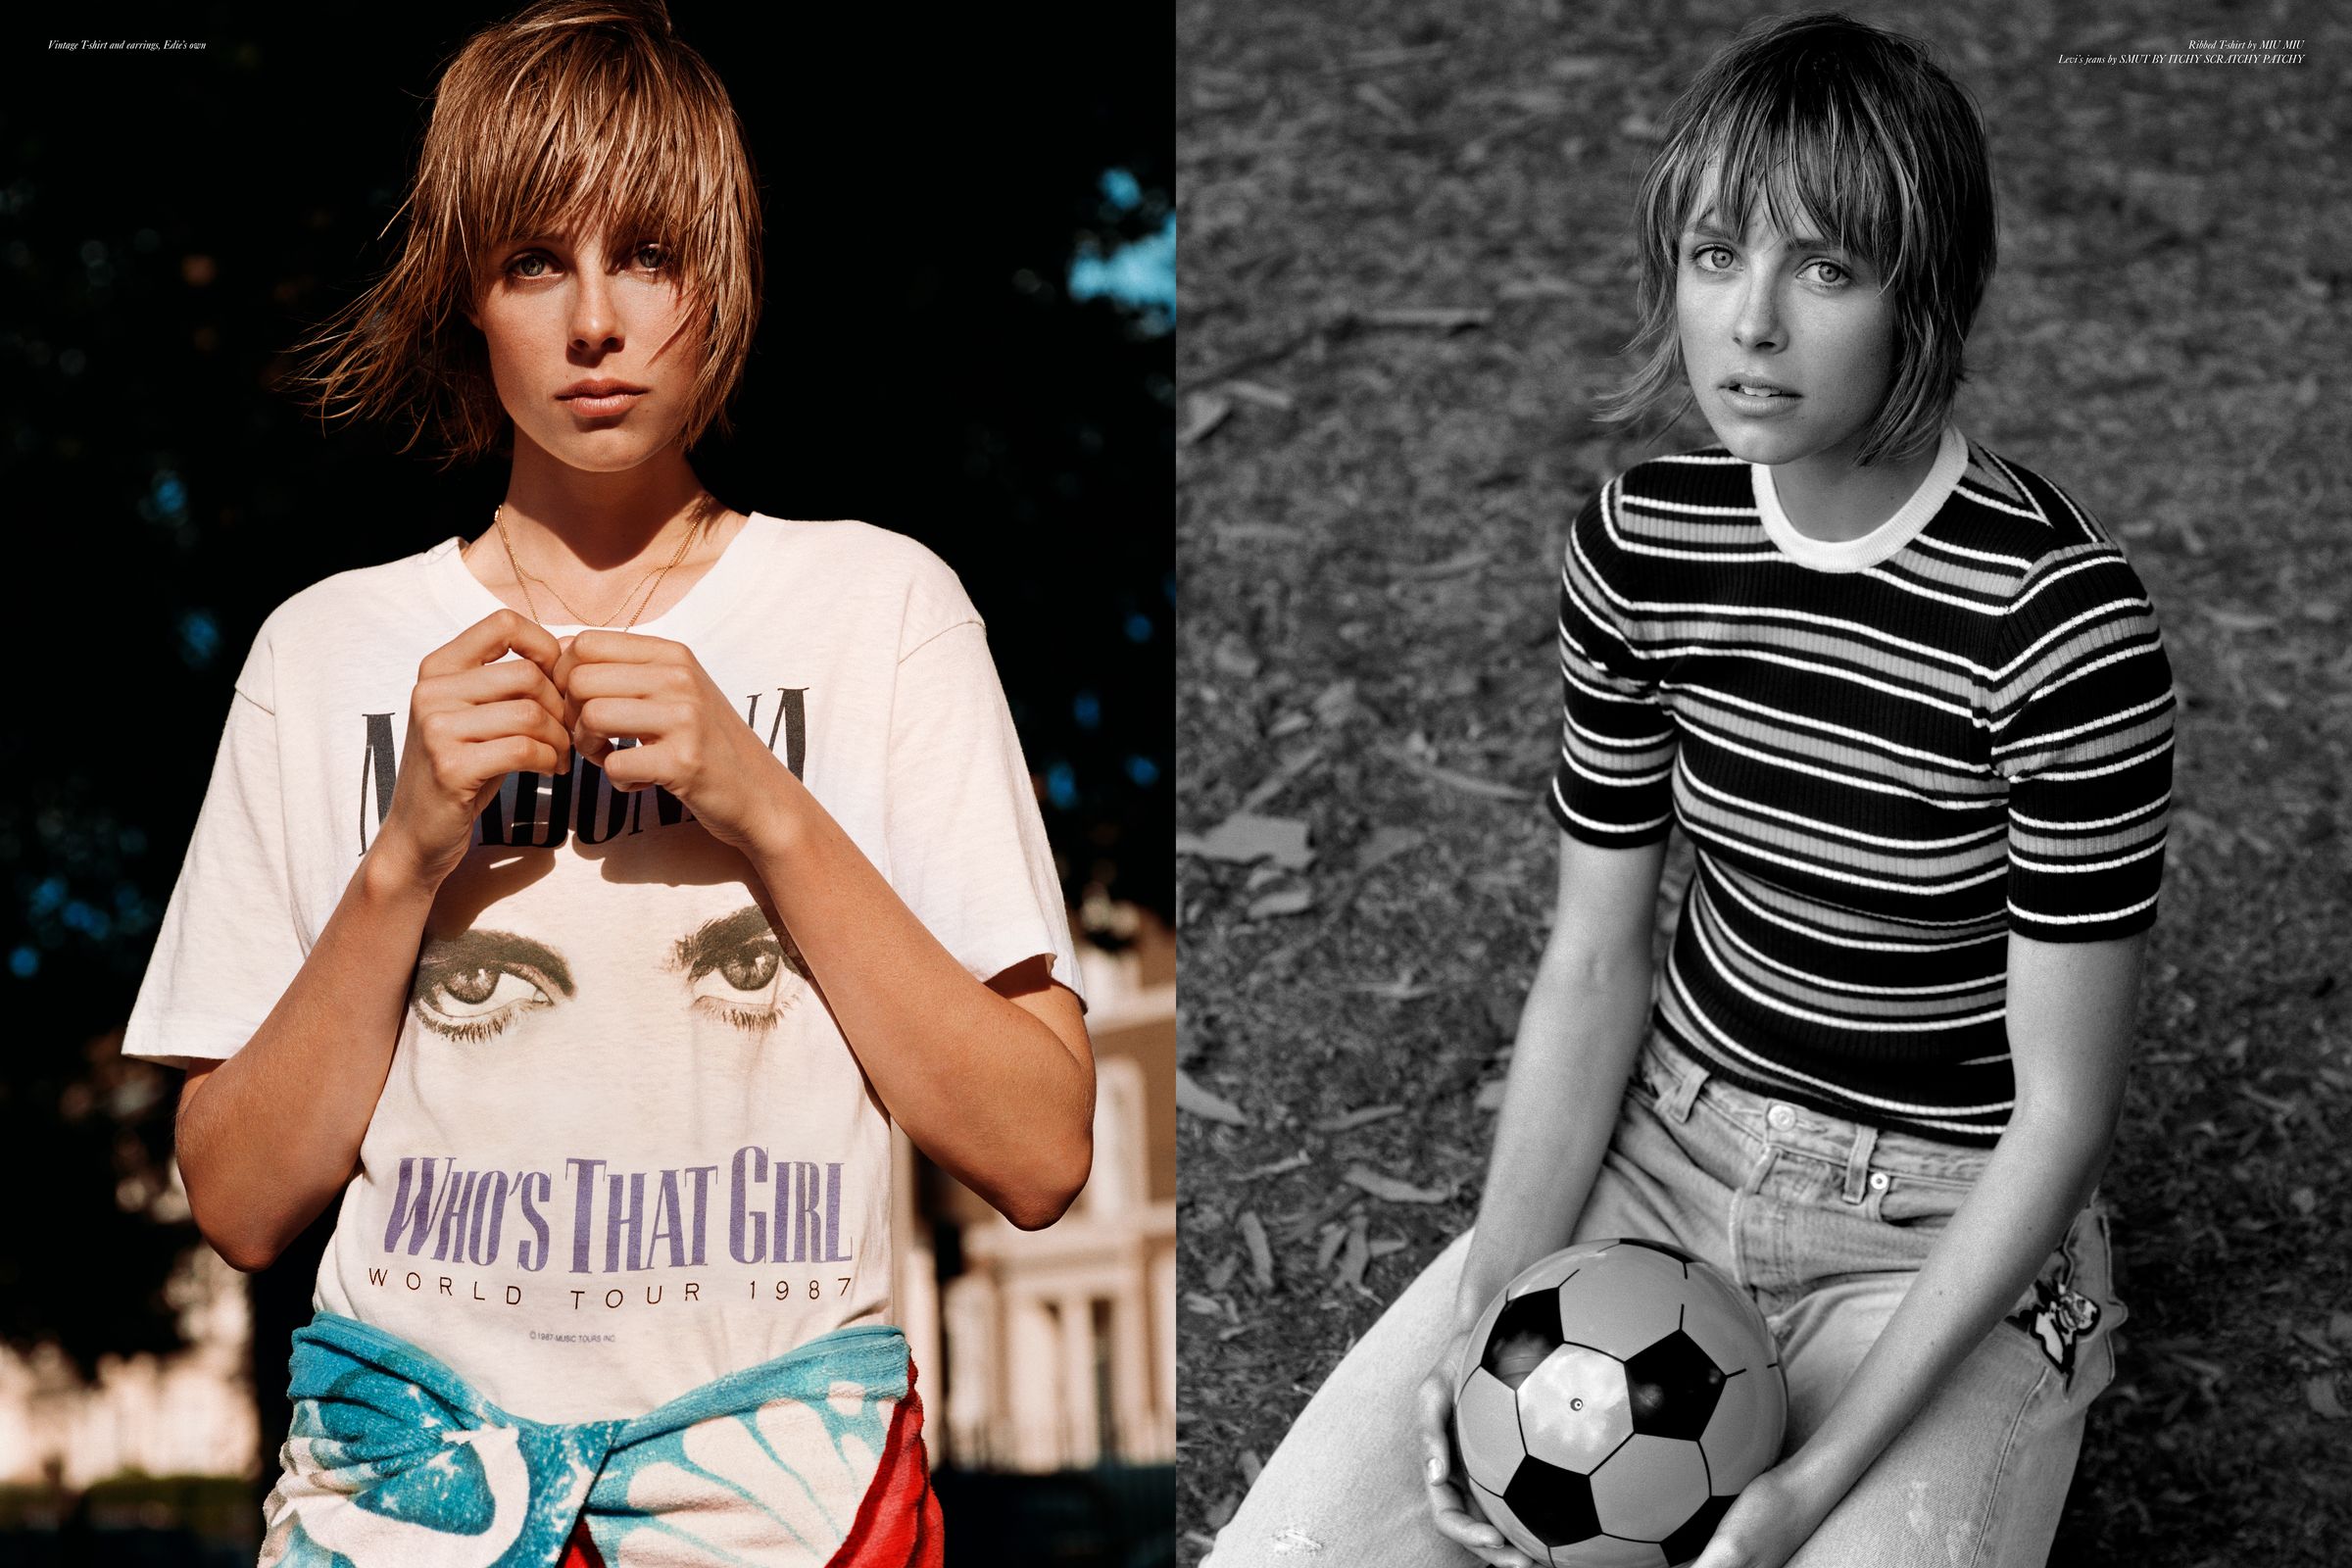 Rika Magazine issue no. 18 Edie Campbell photographed by Alasdair McLellan